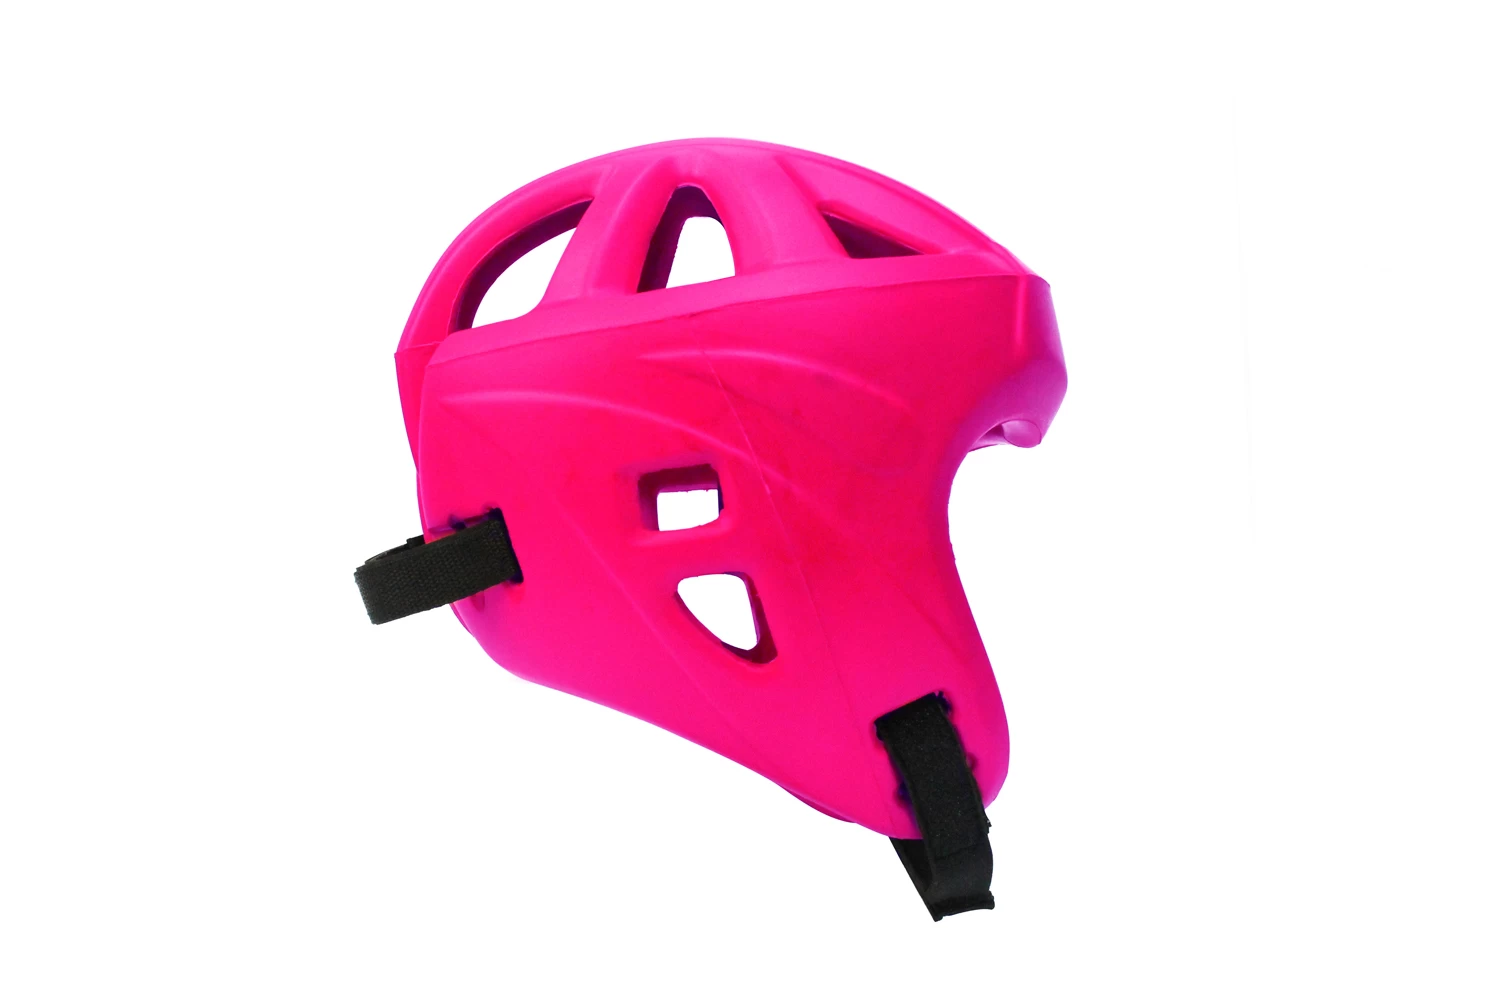 Cina China PU Polyurethane professional safety helmet supplier China head gear for boxing factory China helmet manufacturer produttore